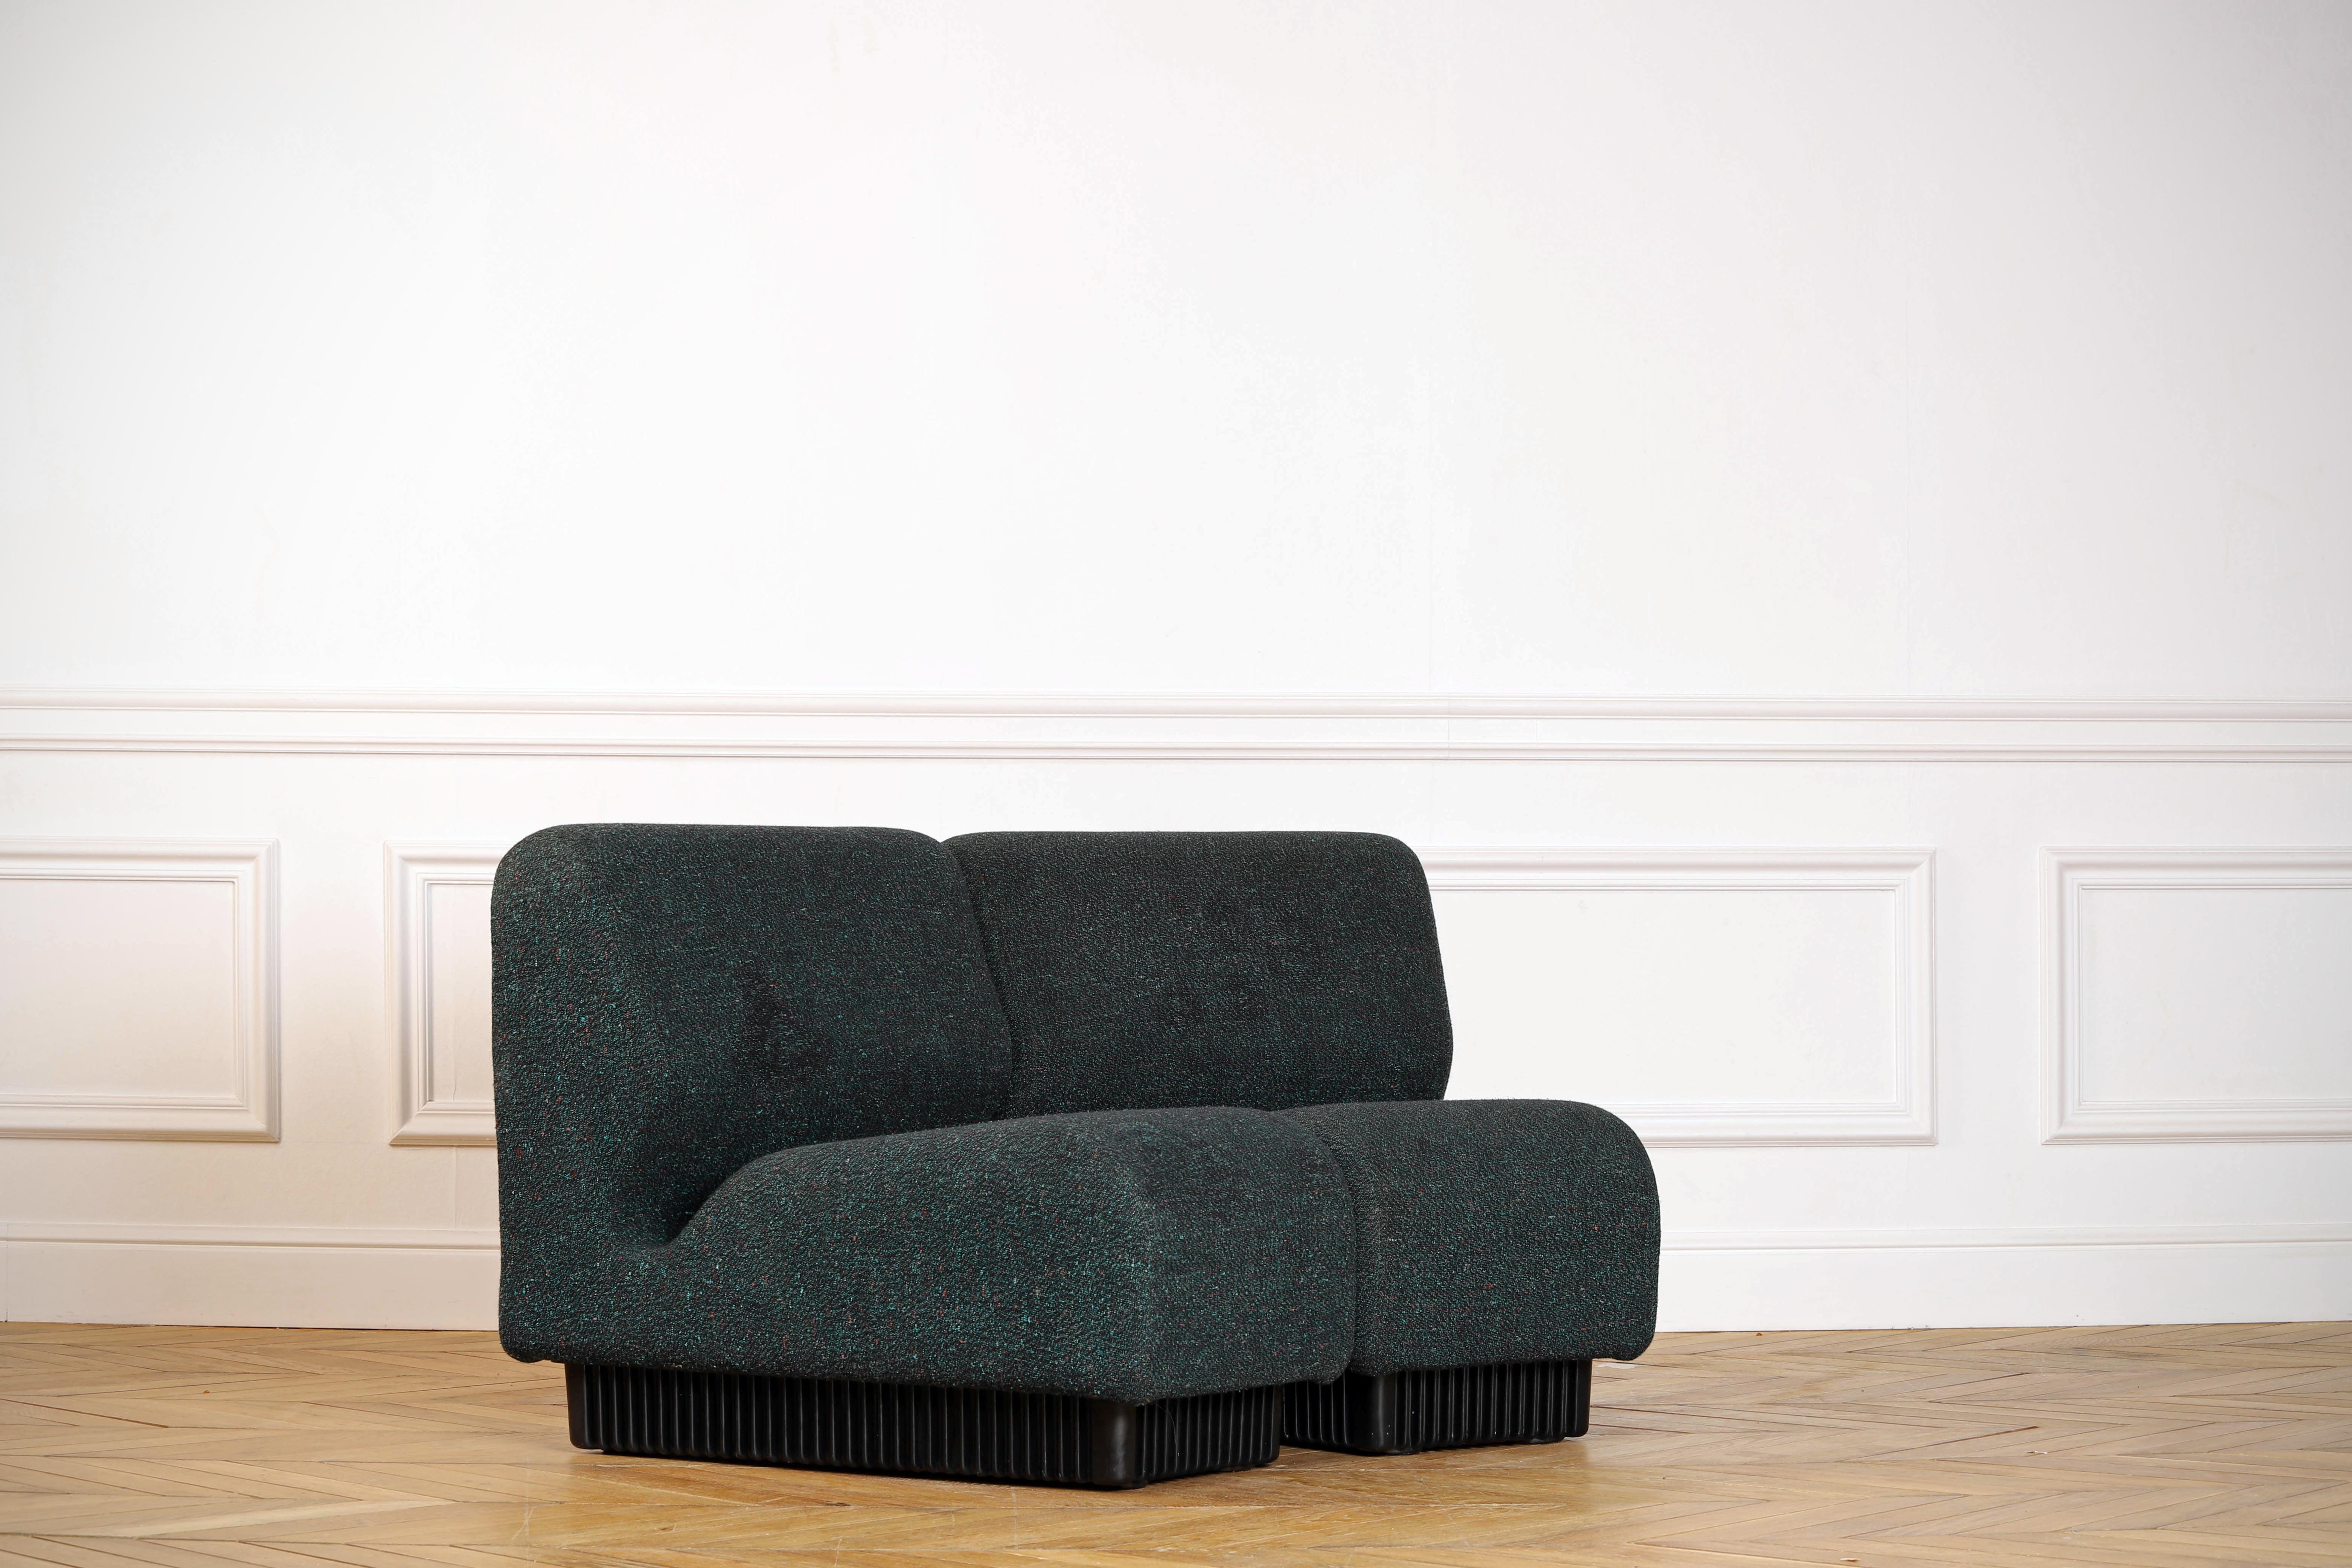 A Mid-Century Modern two-piece modular sofa designed by Don Chadwick for Herman Miller. The sections can be arranged in different configurations. This set is made with green wool and rests on a black molded base.